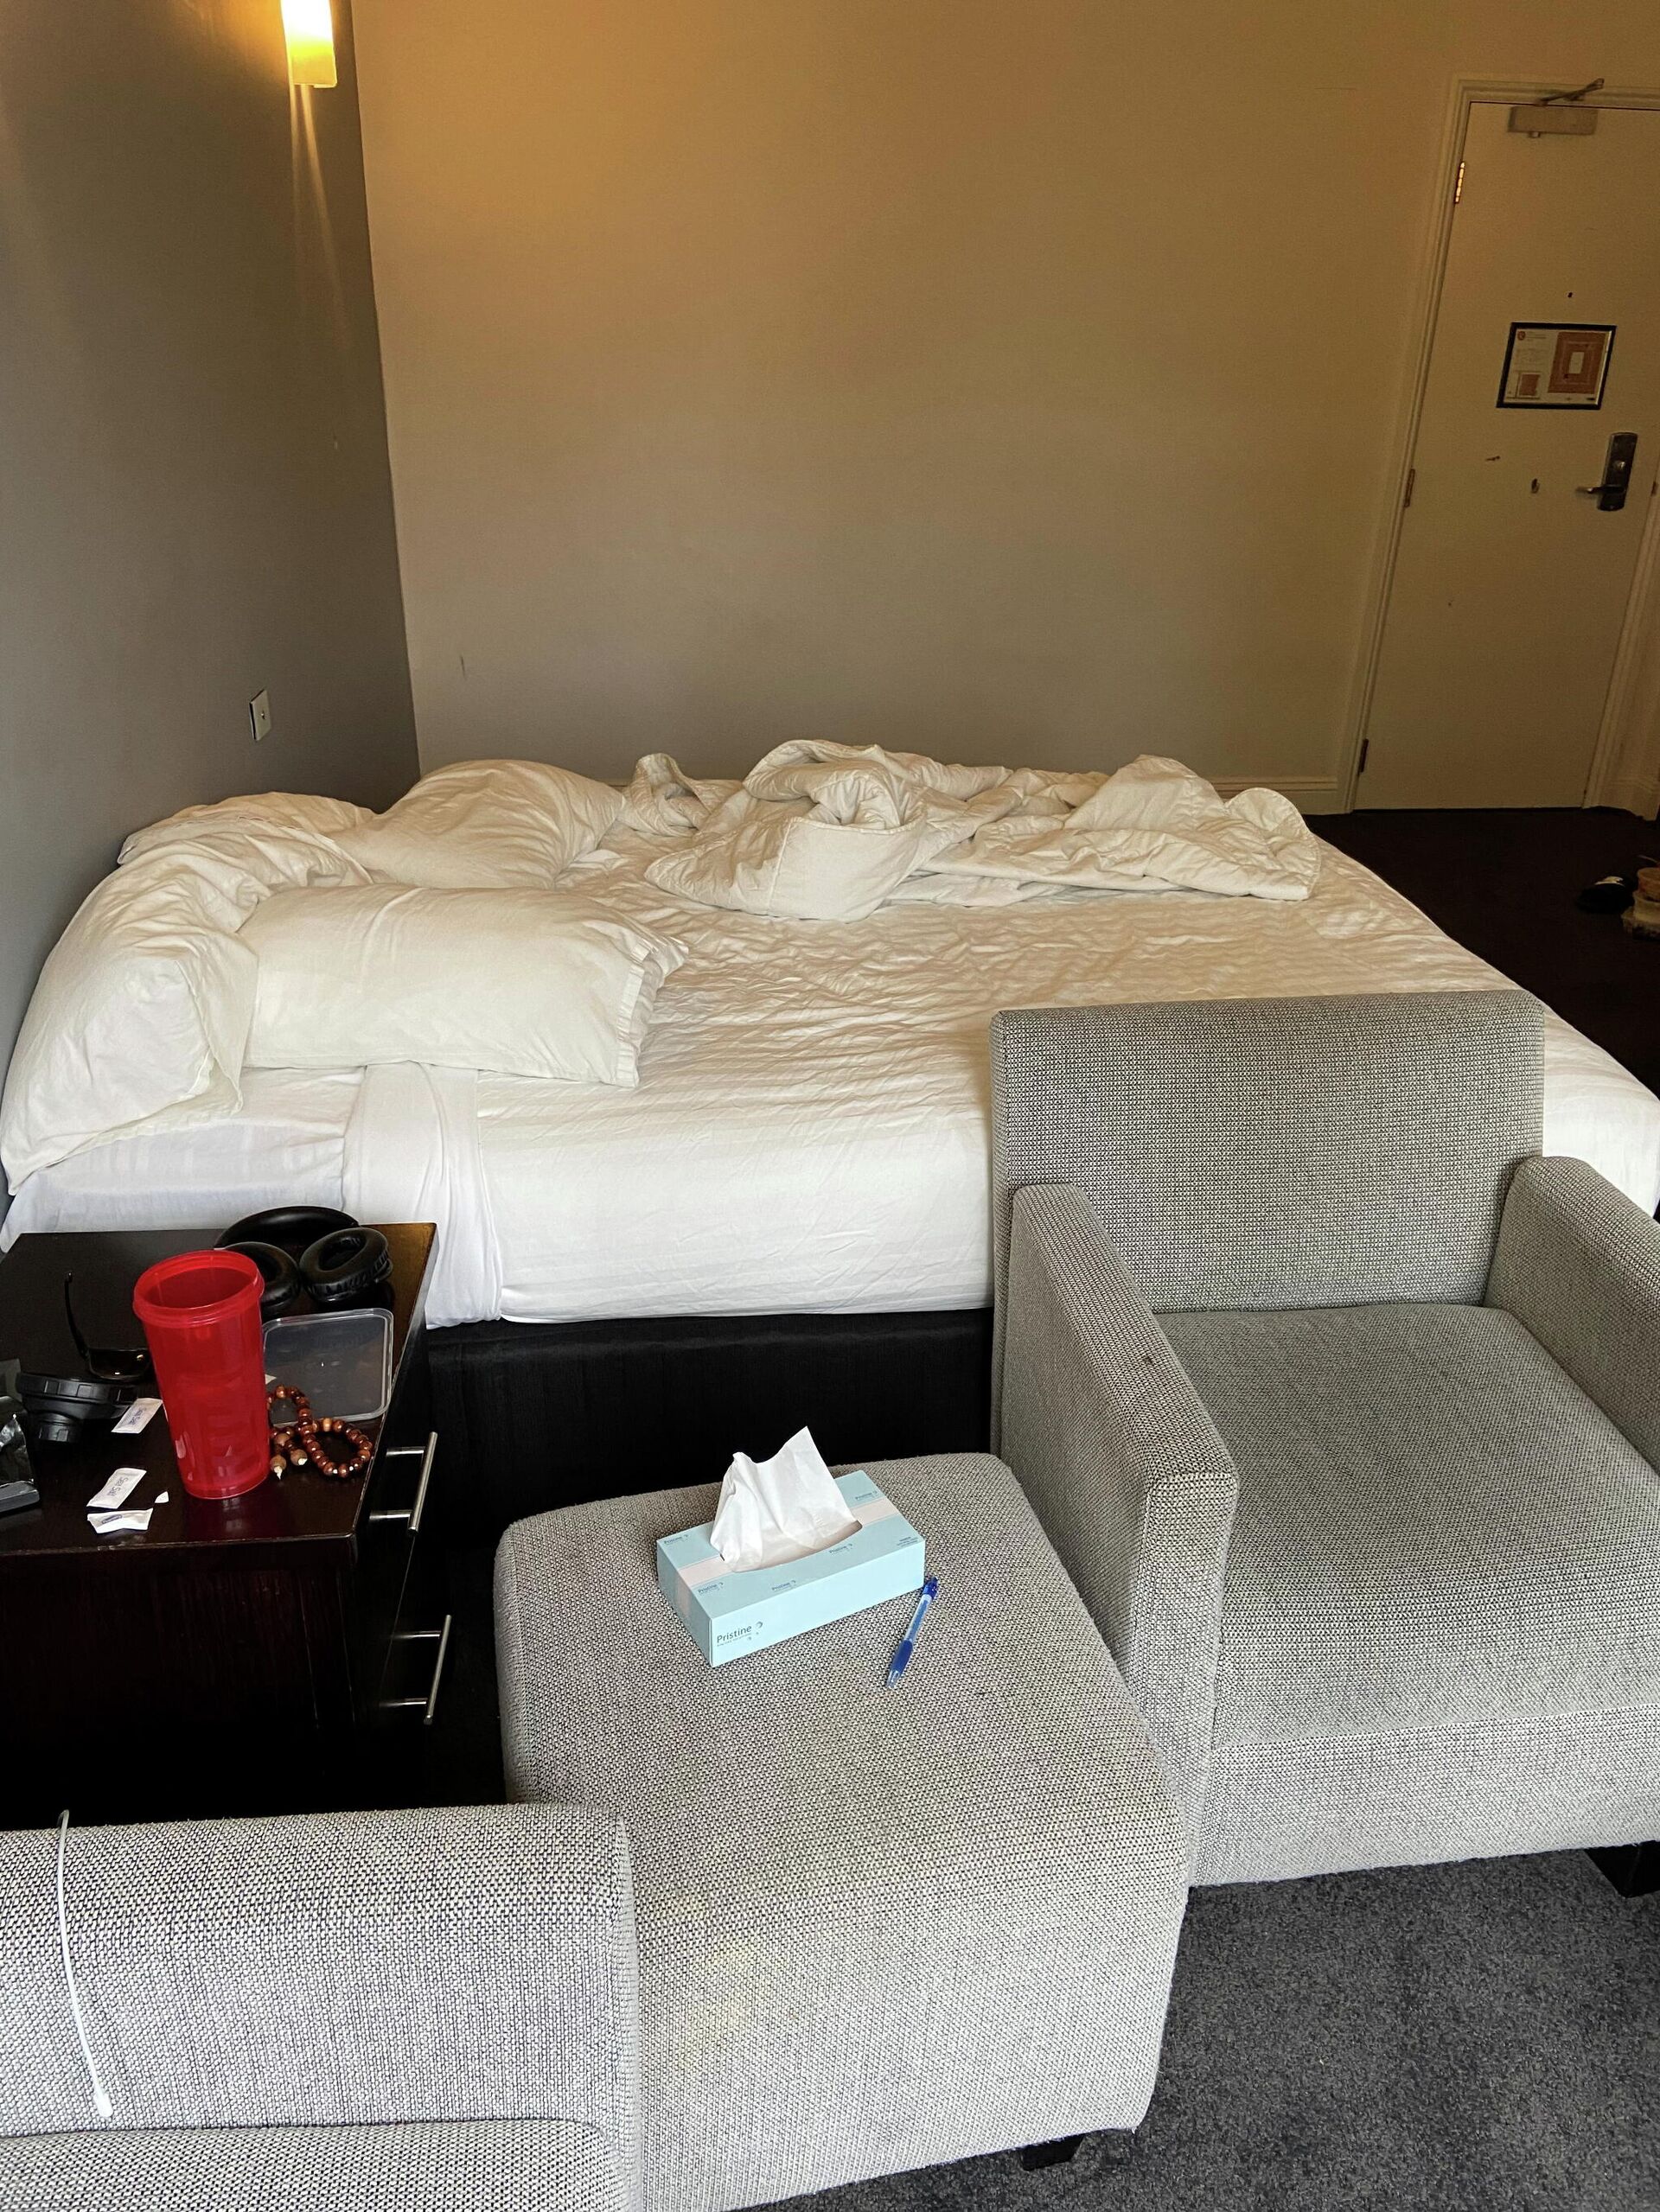 The inside of the bedroom of Hossein Latifi, an asylum seeker who is detained at the Park Hotel where Serbian tennis player Novak Djokovic is believed to be held while he stays in Melbourne, Australia, is seen in this picture obtained from social media on January 7,2022 - Sputnik International, 1920, 08.01.2022